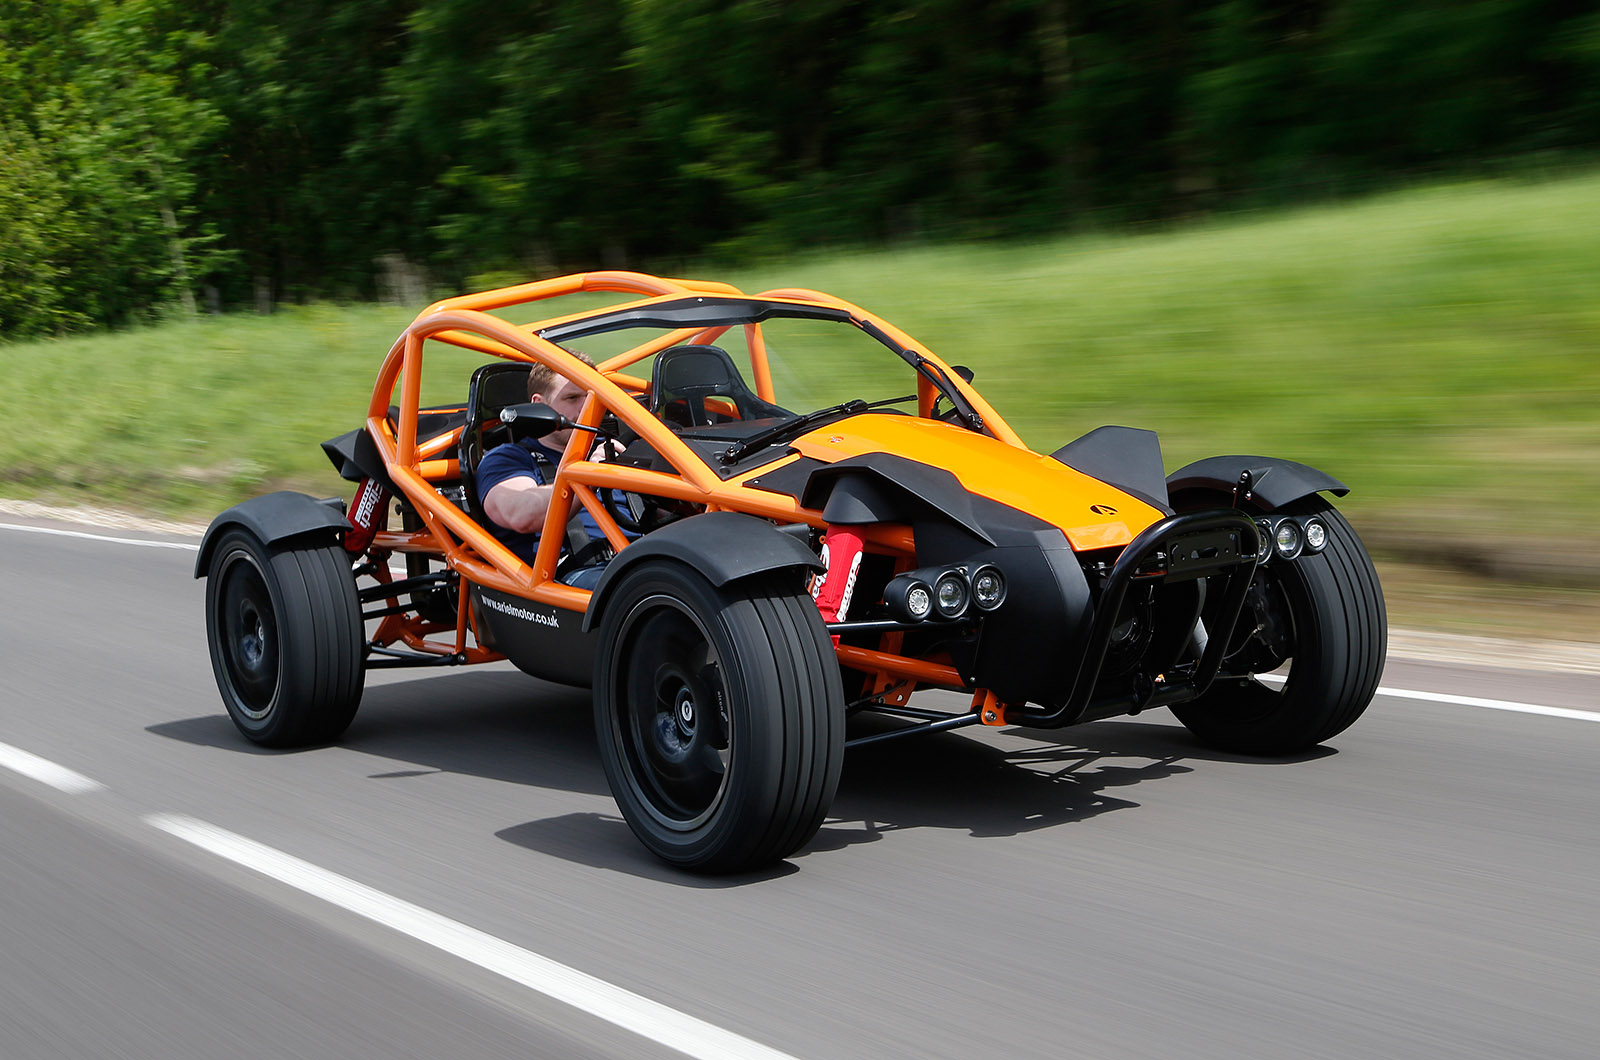 Ariel Nomad Wallpapers